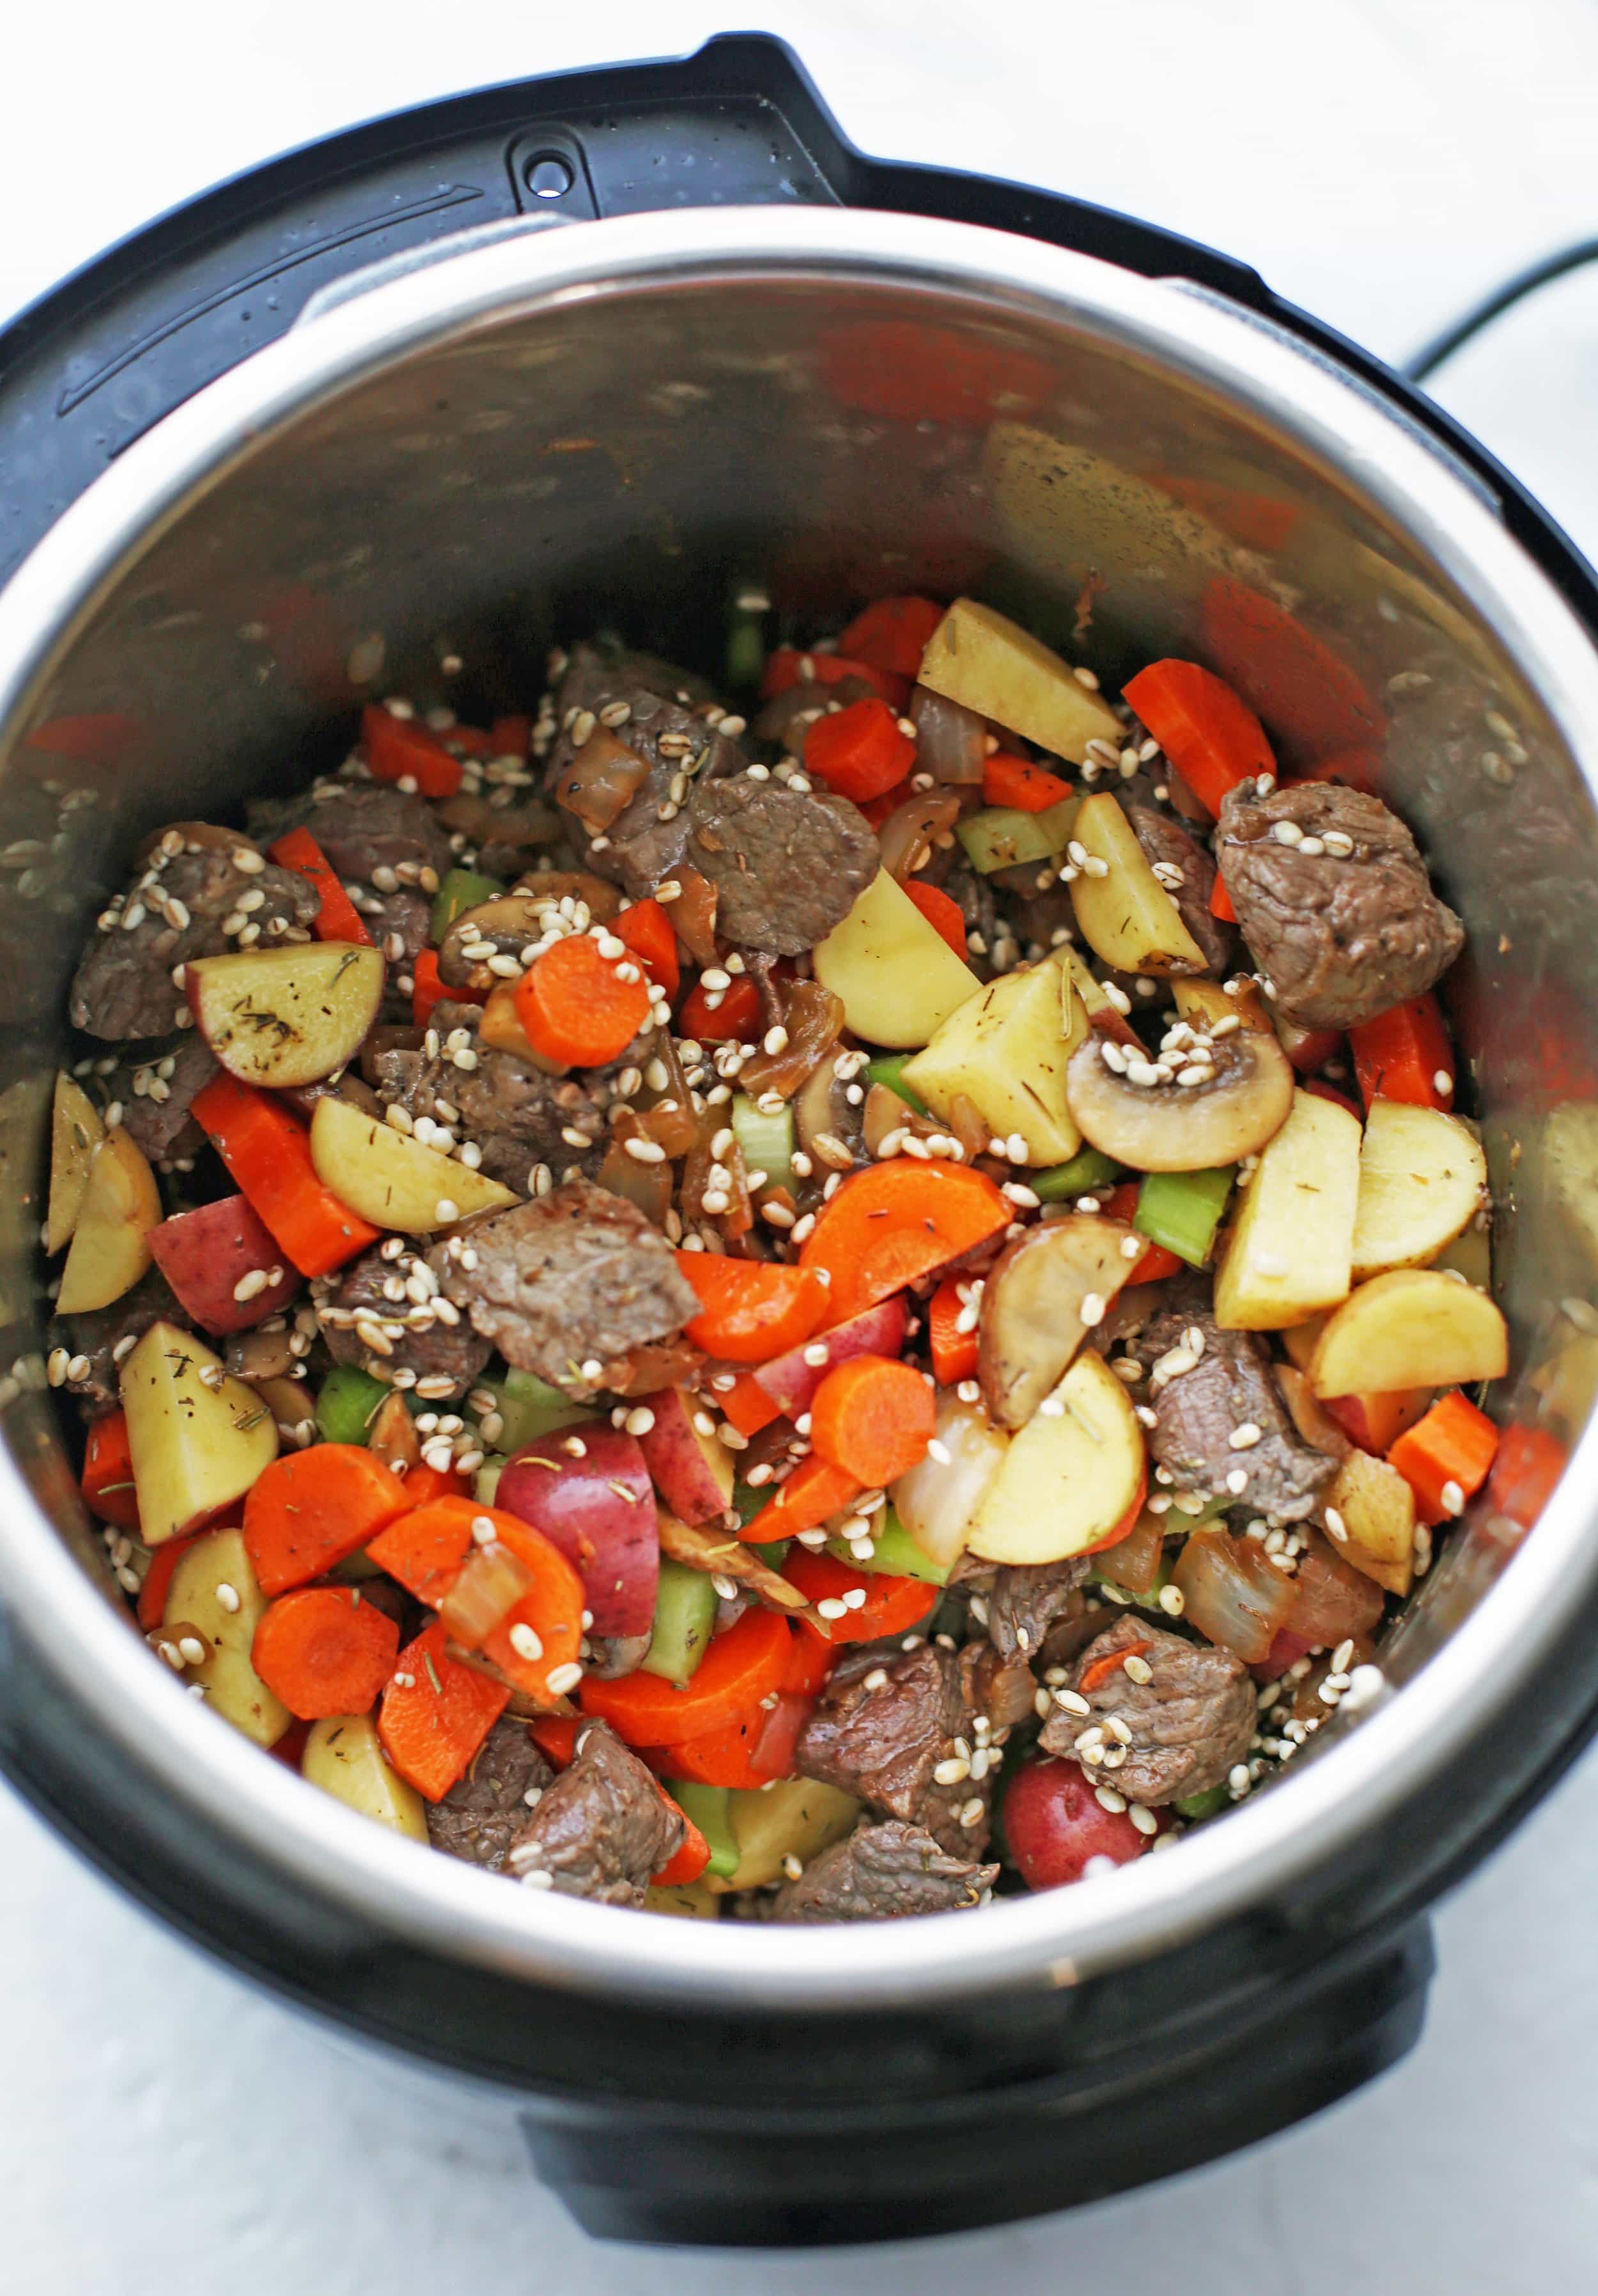 Browned beef, vegetables, dry pearl barley, and mushrooms stirred in the Instant Pot.